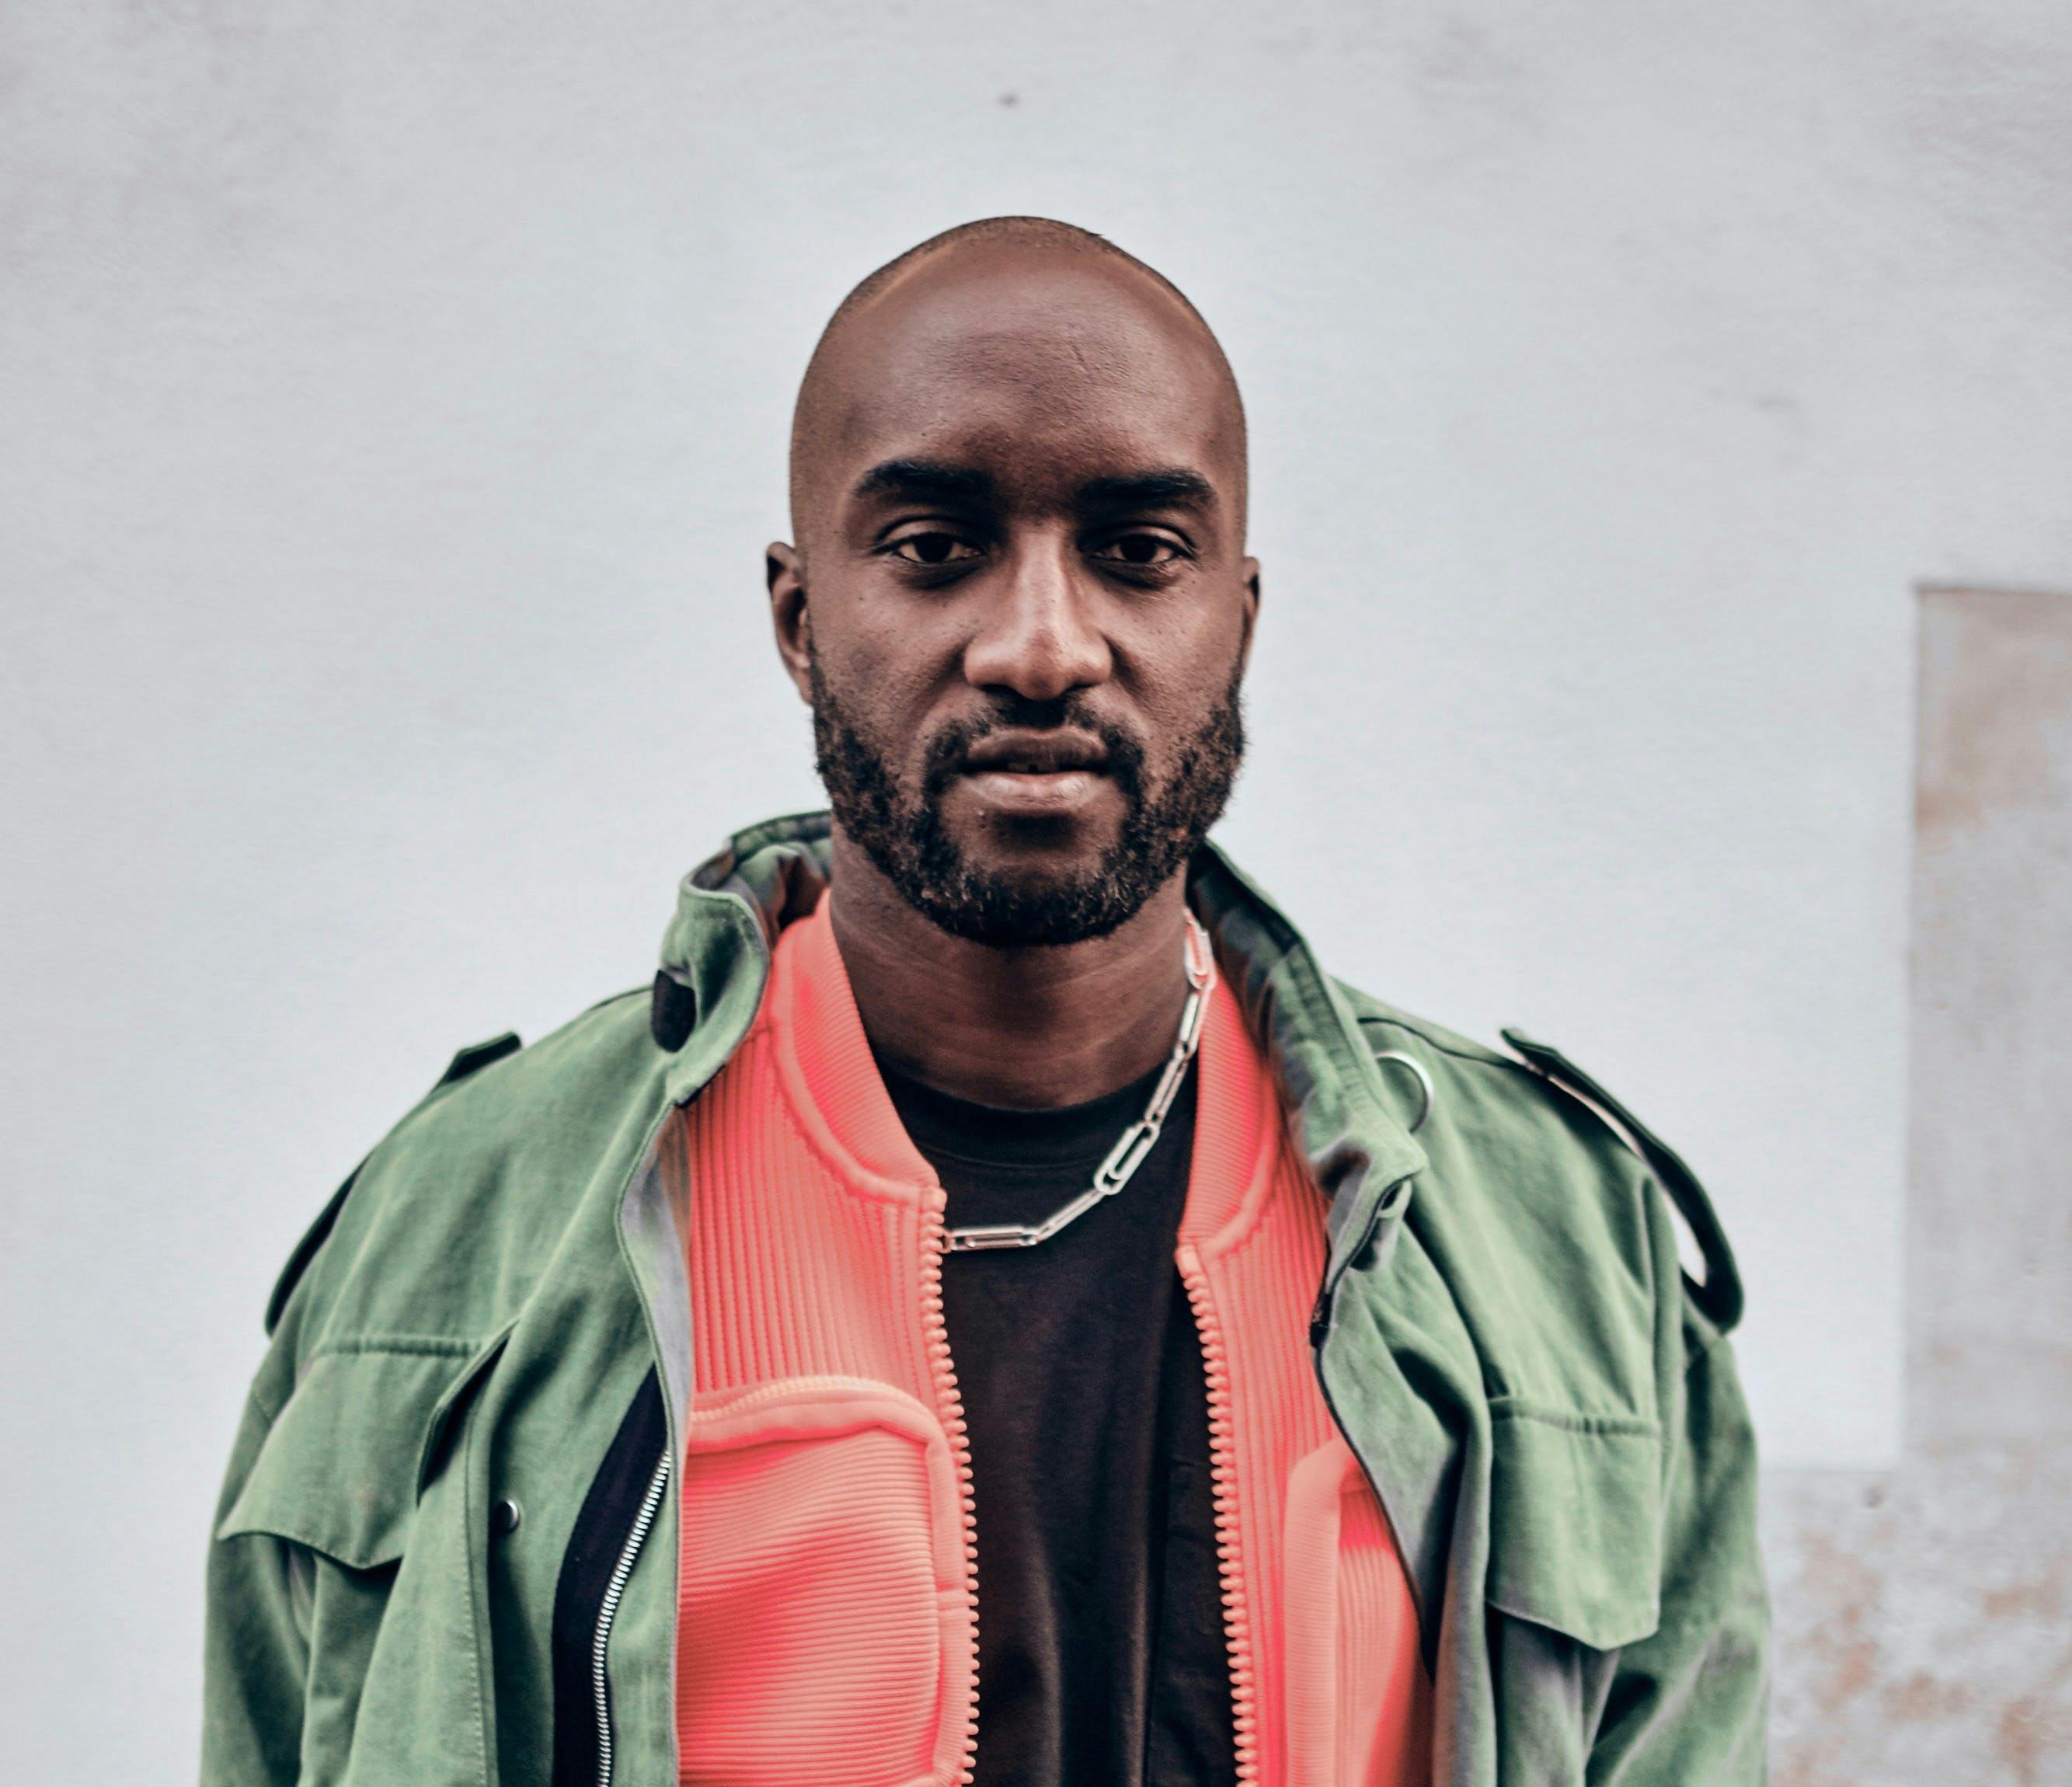 Virgil Abloh: Wisconsin alum and visionary fashion designer dies from  cancer at 41